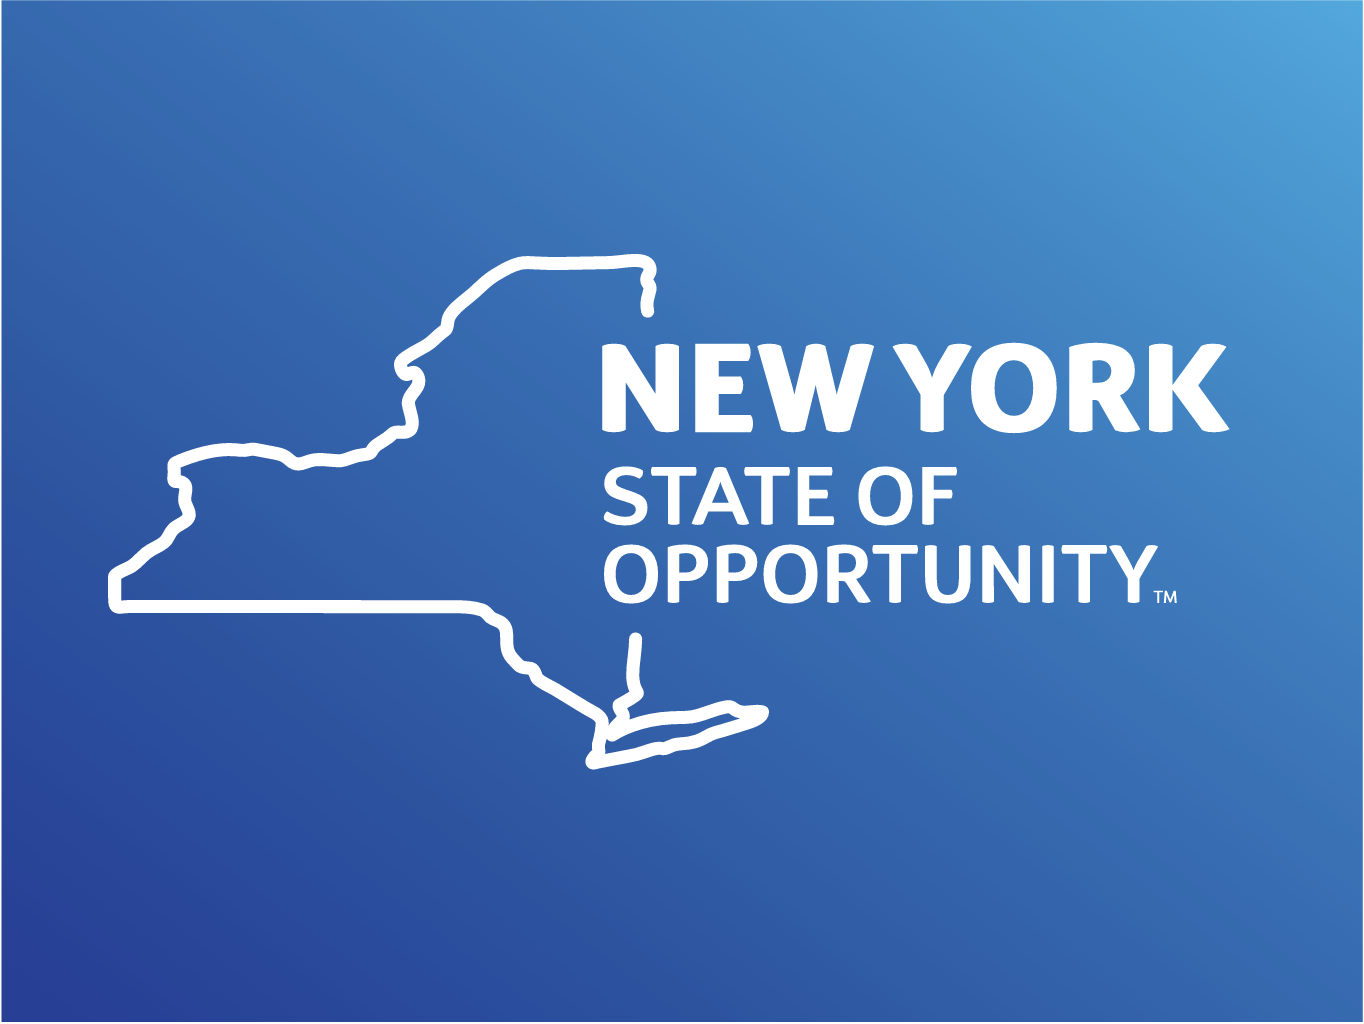 New York State Logo White Letters on a Blue Gradient Background